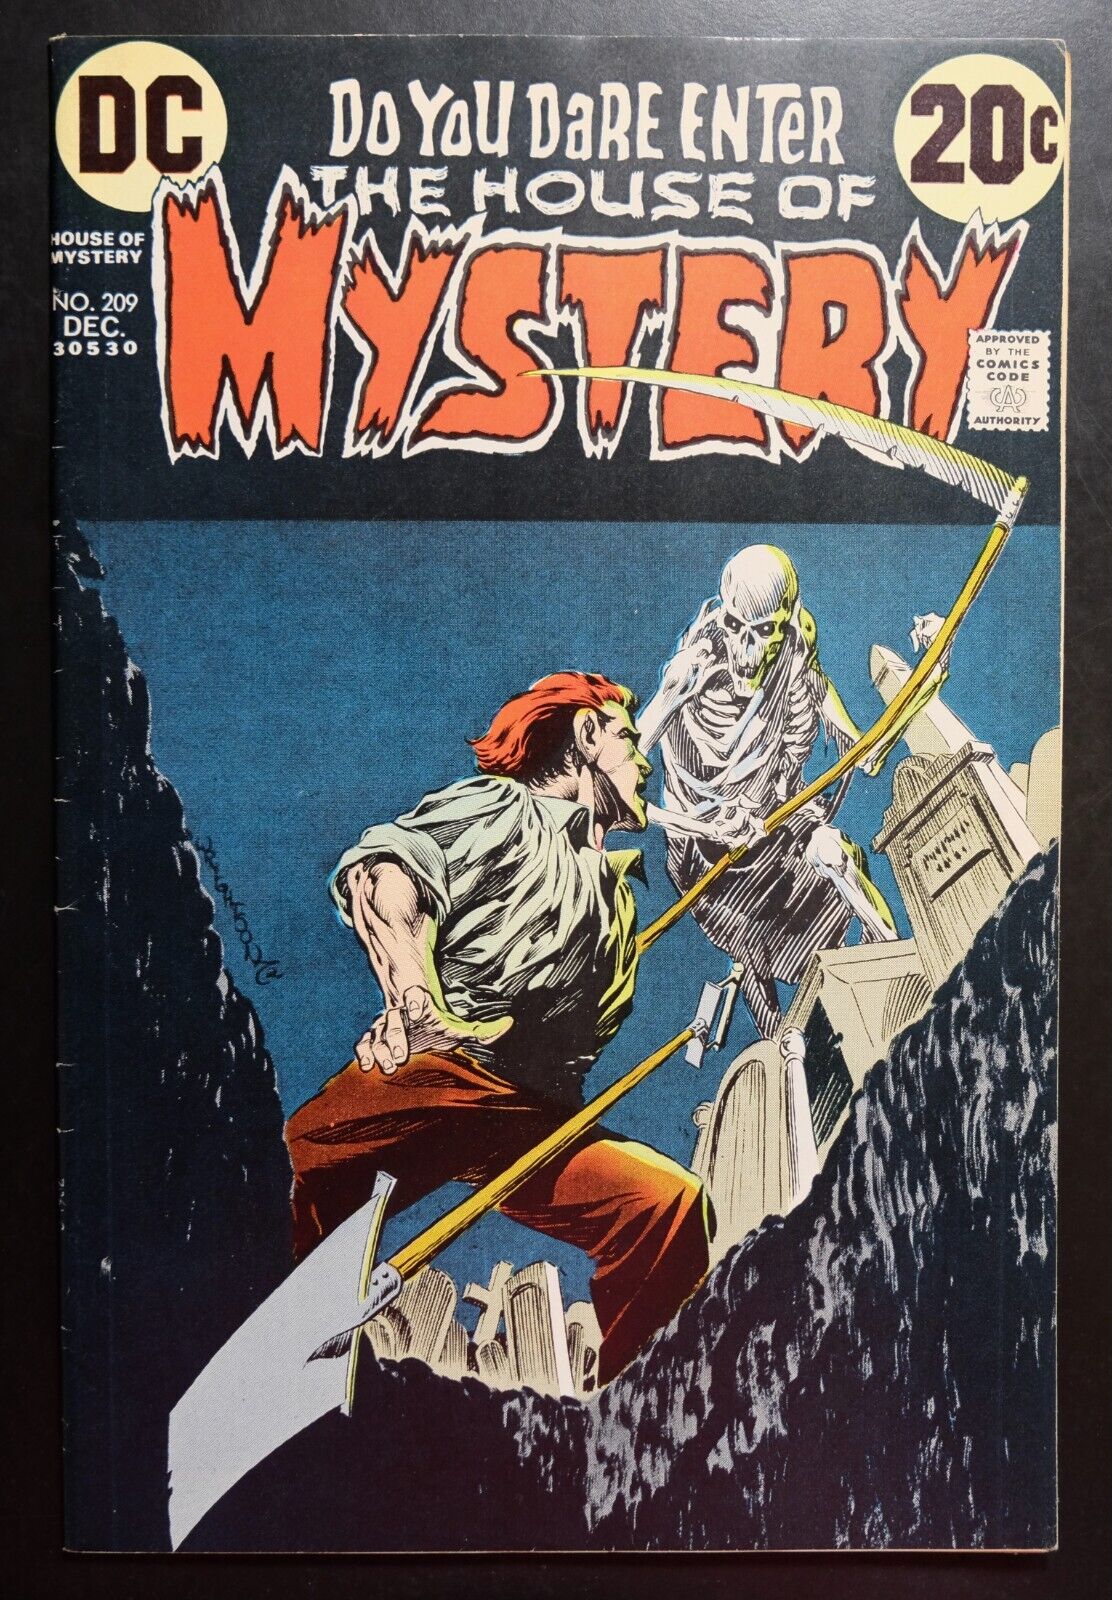 HOUSE OF MYSTERY #209 VF/NM (9.0) - OW PAGES *WRIGHTSON SKELETON COVER*